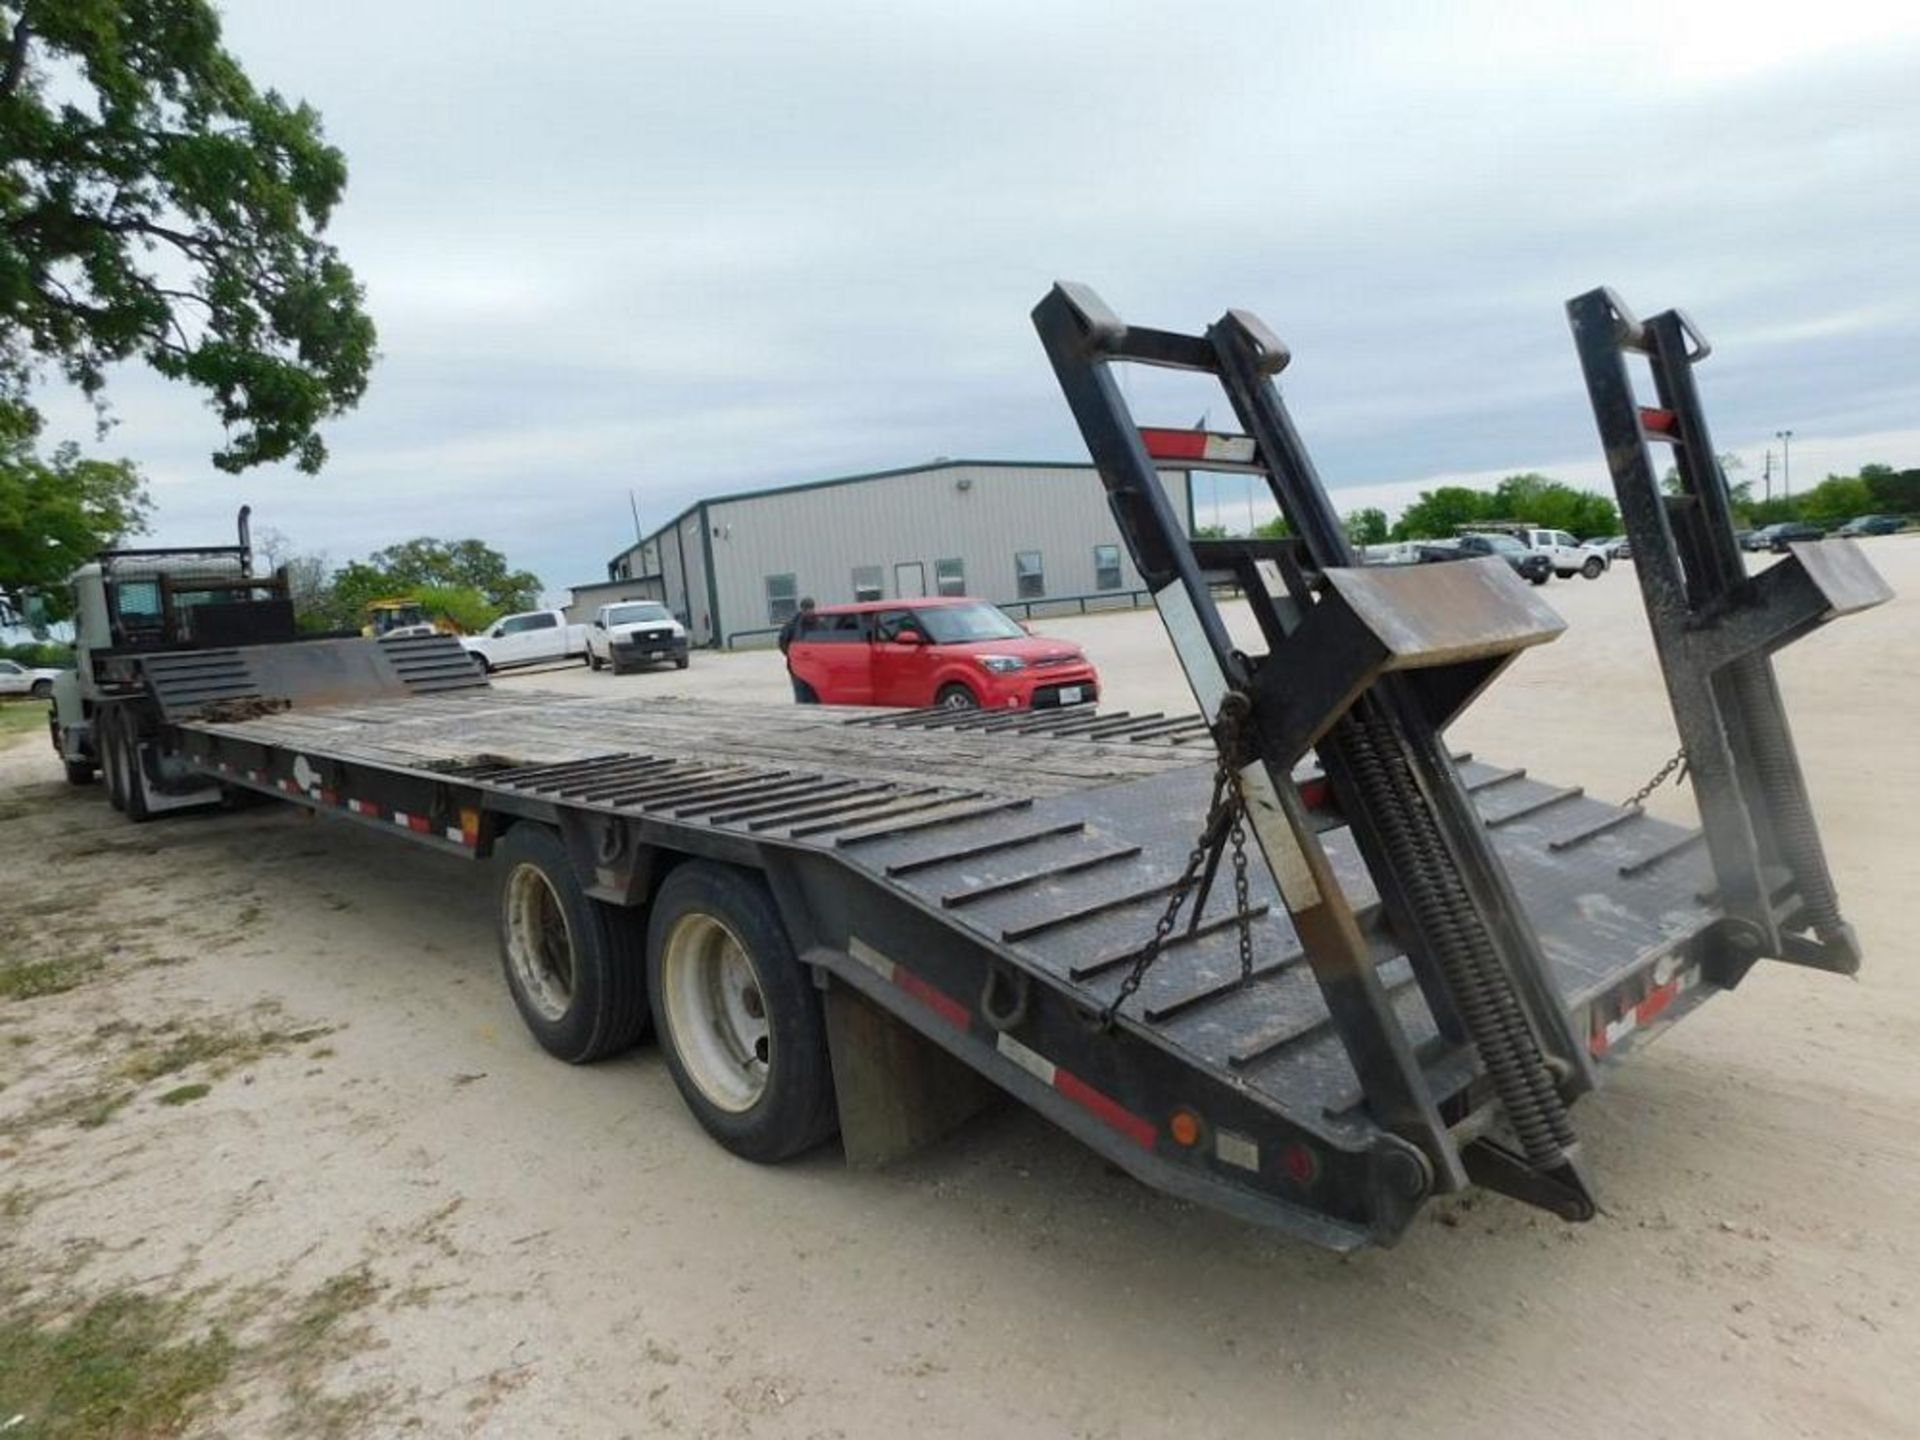 2013 Viking Tandem-Axle Equipment Trailer, VIN 1V9CR4624DN062853, 102 in. Wide, 46 ft. Long Overall, - Image 3 of 3